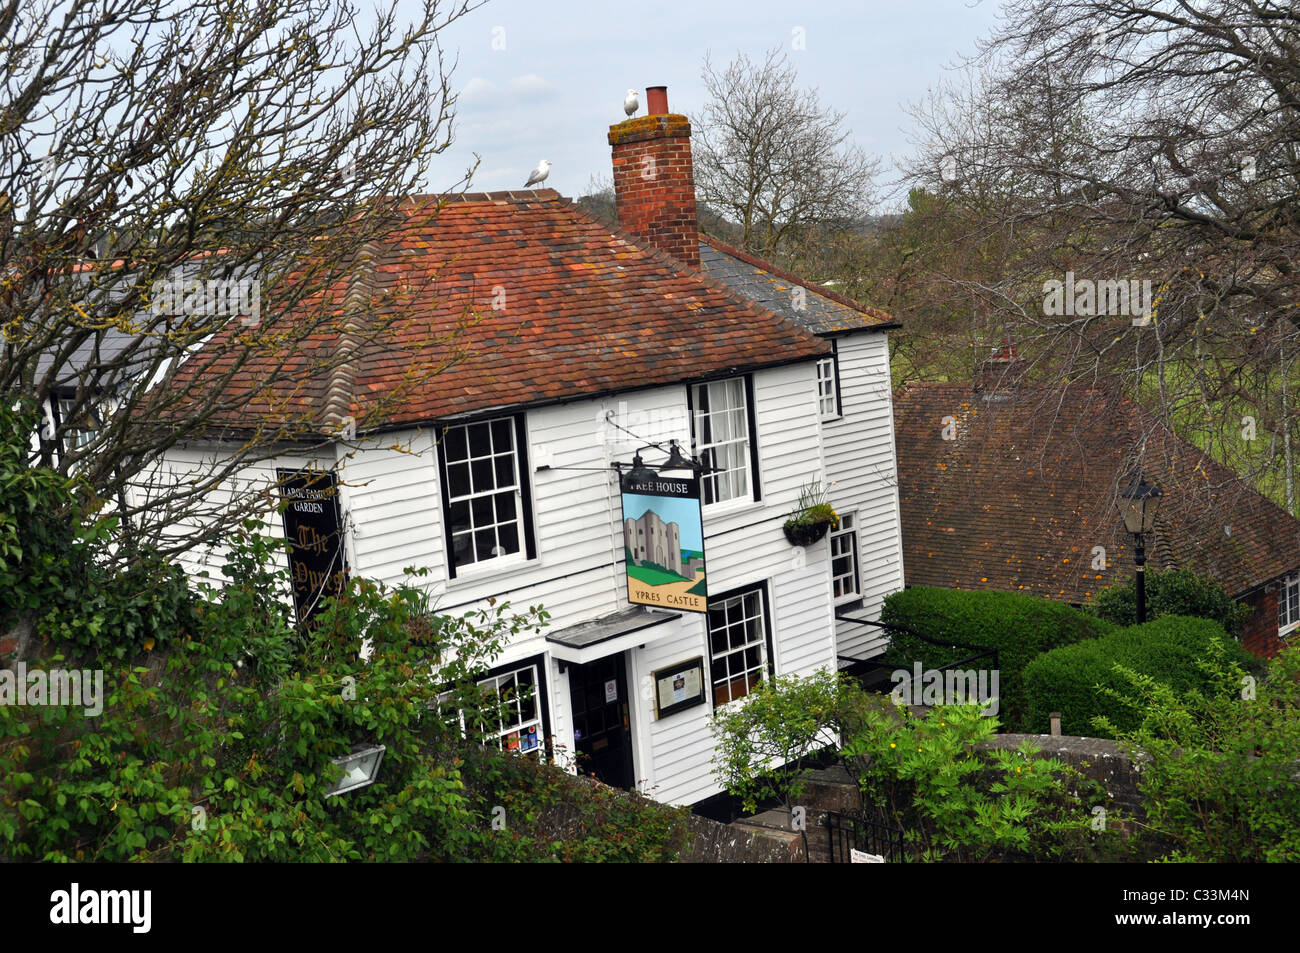 The Ypres Castle Inn, Rye, known locally as 'The Wipers'. Stock Photo